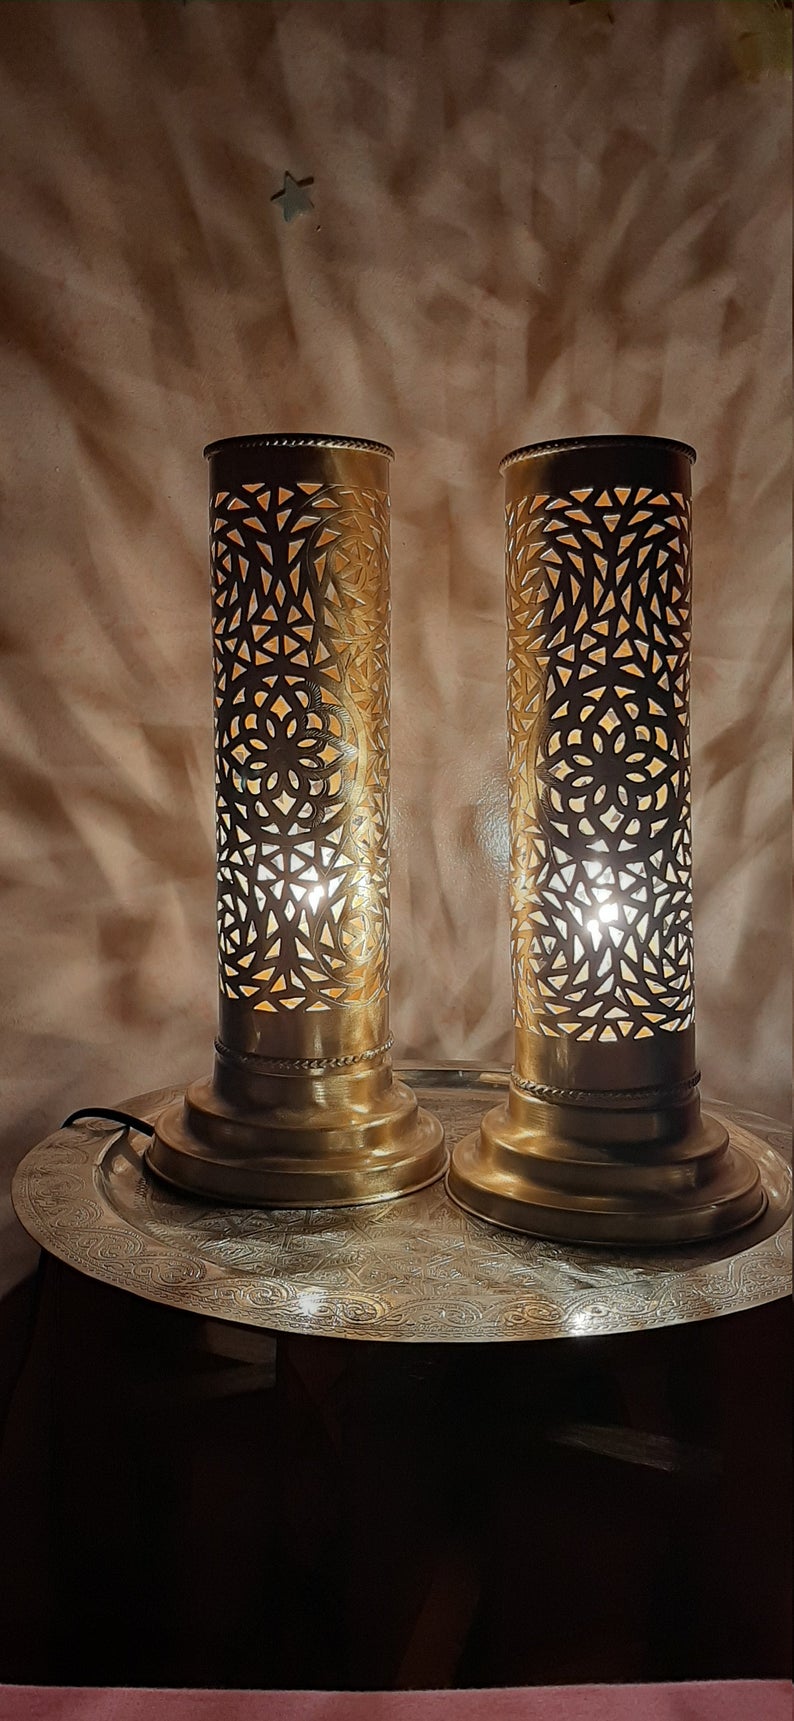 Set of 2 table lamps, Moroccan table lamps, desk lamp, bedside lamp, floor lamp, Moroccan lighting/ Ready to ship.